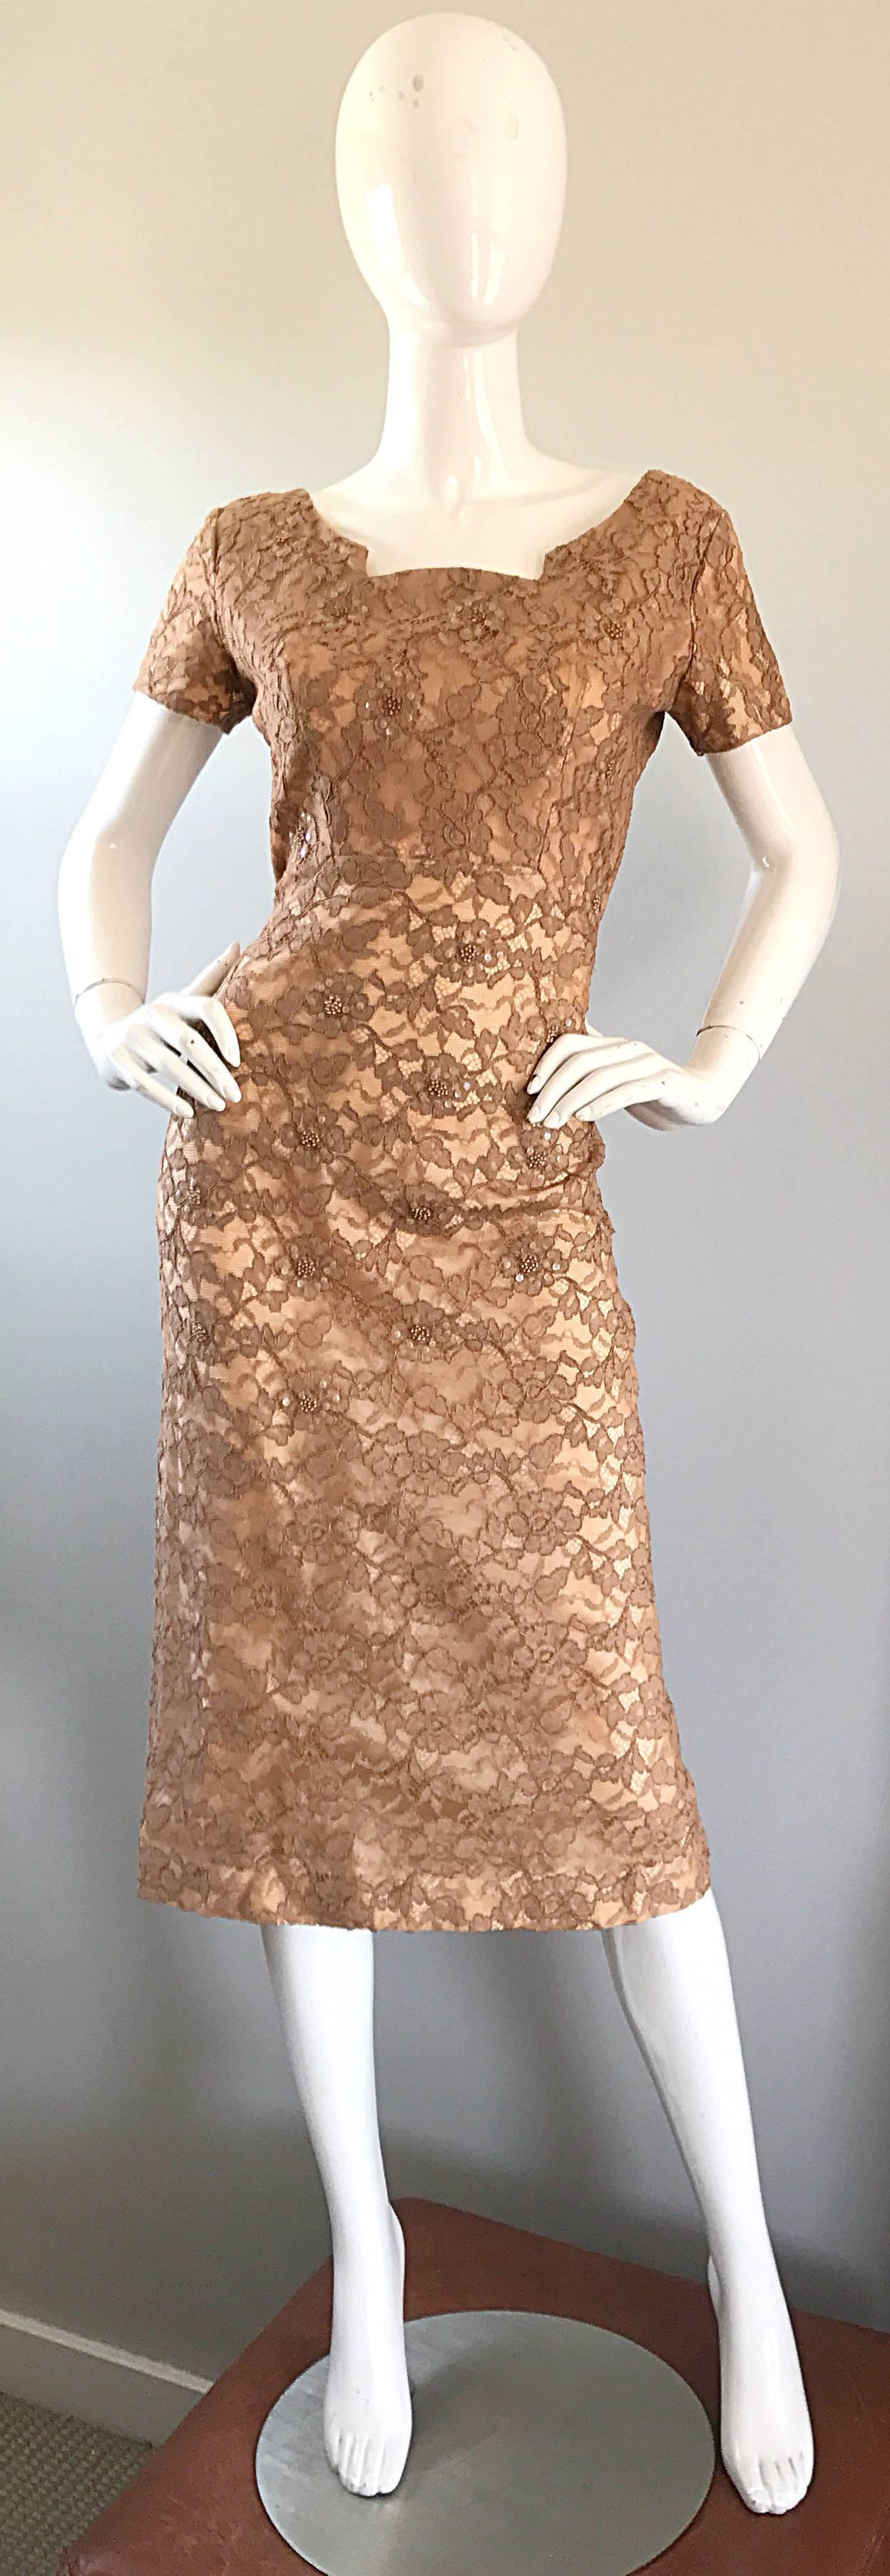 Gorgeous 1950s demi couture nude, tank and beige tea length silk lace cocktail dress! Impeccable construction, with so much heavy attention to detail. Fitted bodice features hundreds of hand-sewn iridescent sequins and beads throughout. Skirt